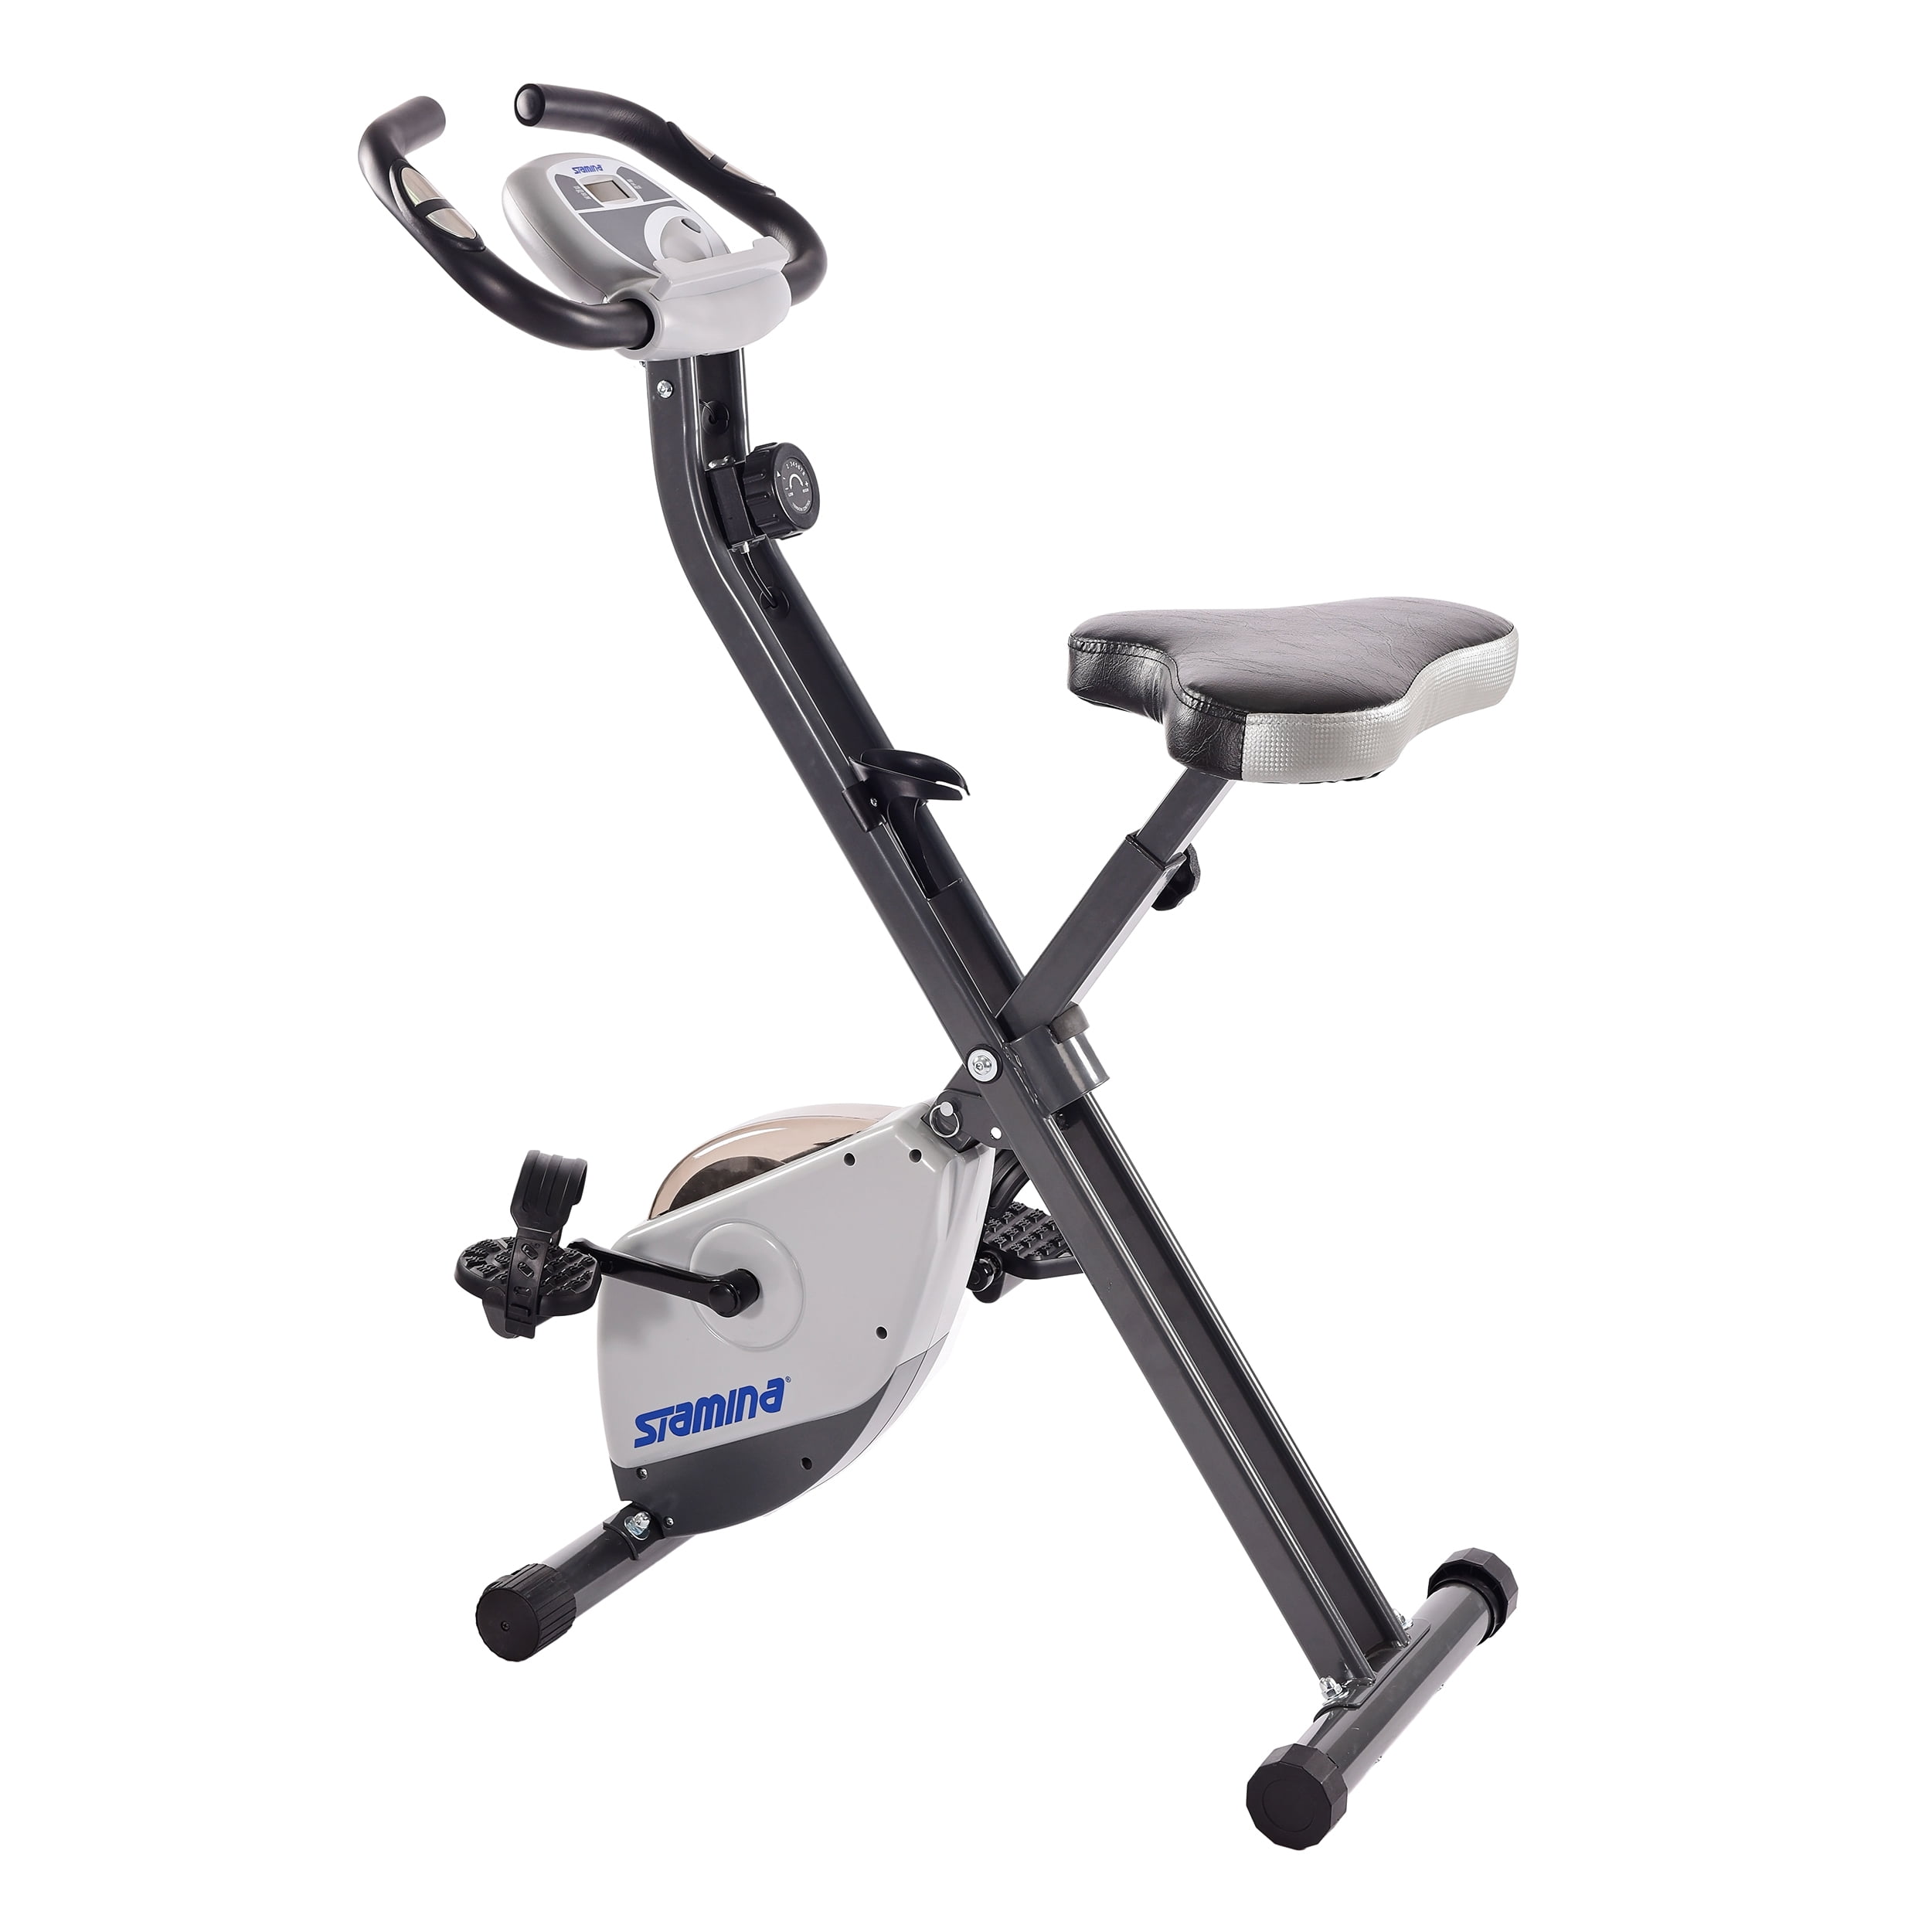 Stamina Cardio Exercise Bike with Heart Rate Sensors and Extra Wide Padded Seat, Folding Design for Storage - Exercise Bike